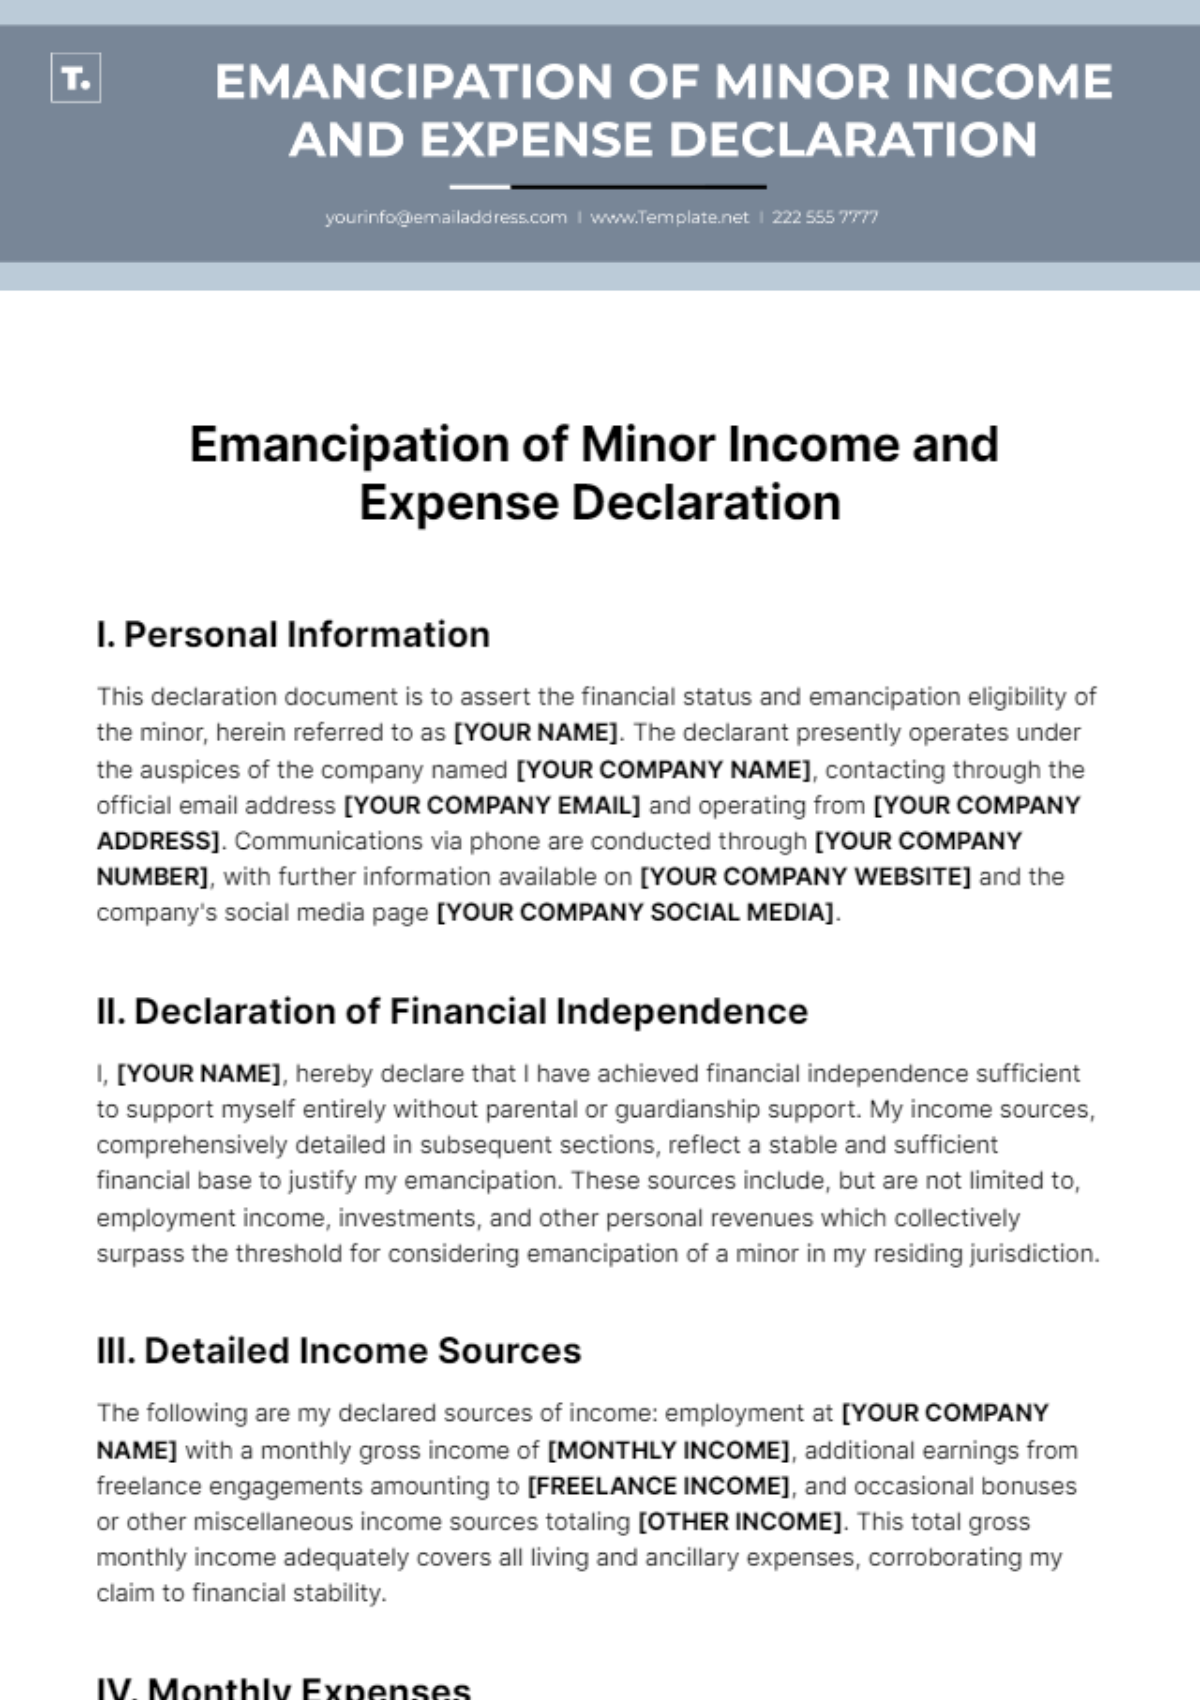 Emancipation of Minor Income and Expense Declaration Template